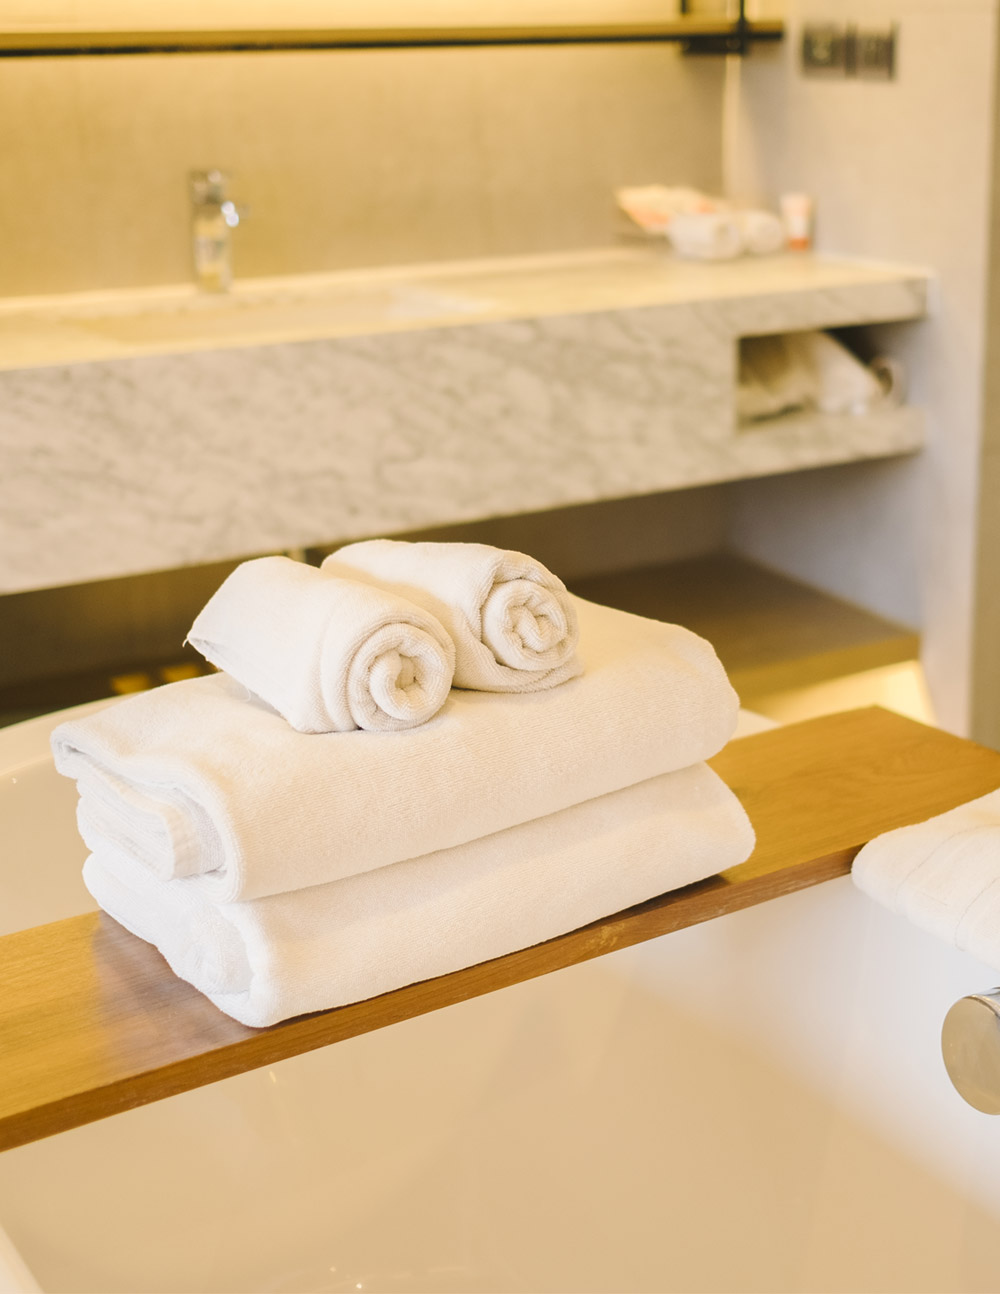 Expert Tips for Selecting the Perfect Hotel Bathroom Vanity